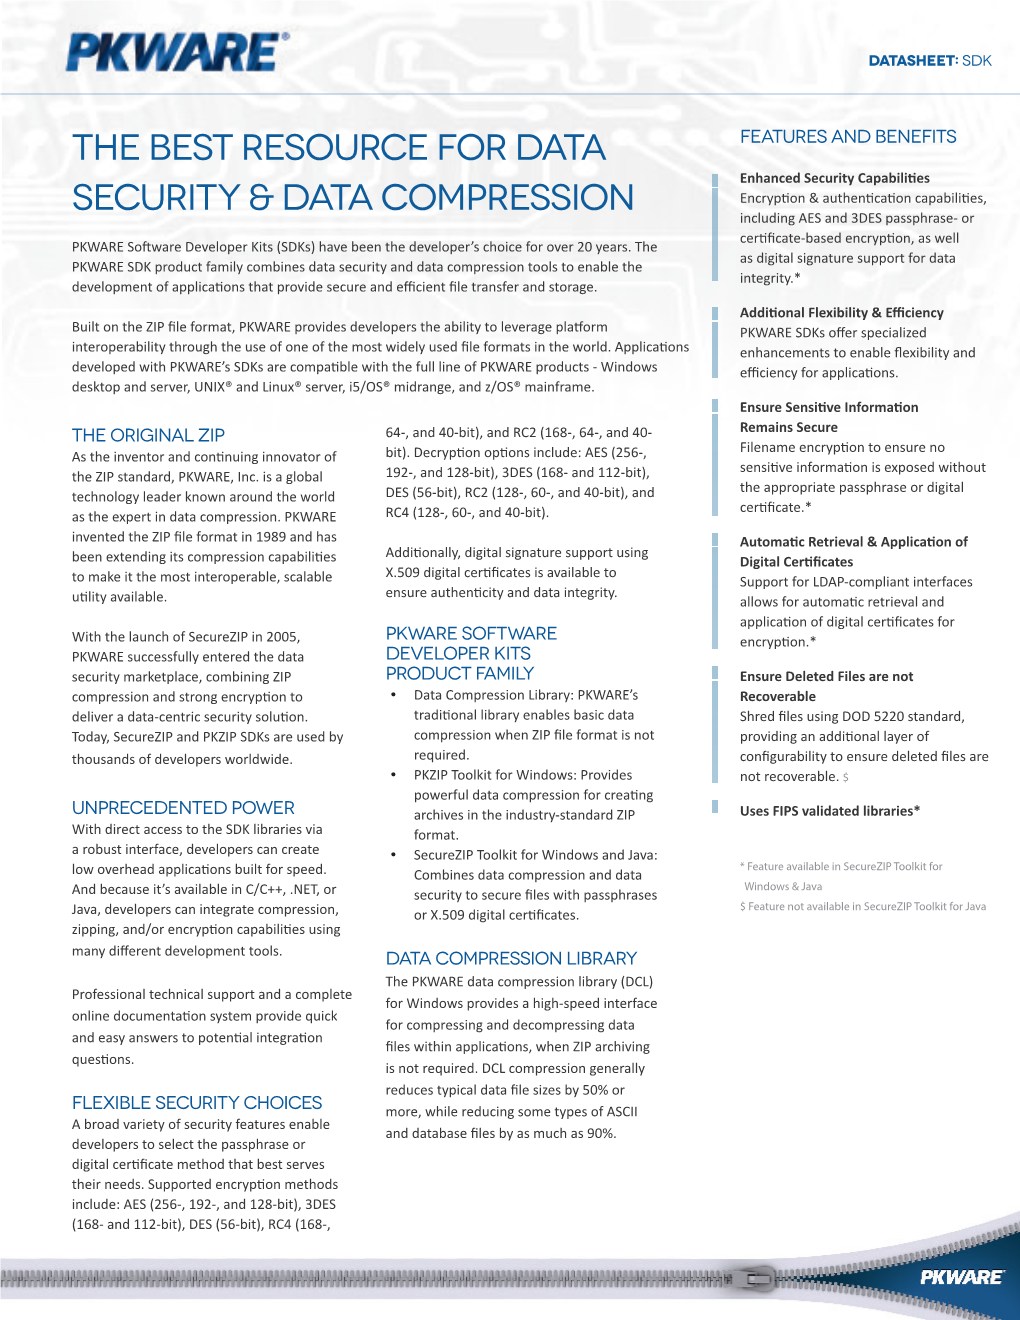 The Best Resource for Data Security & Data Compression